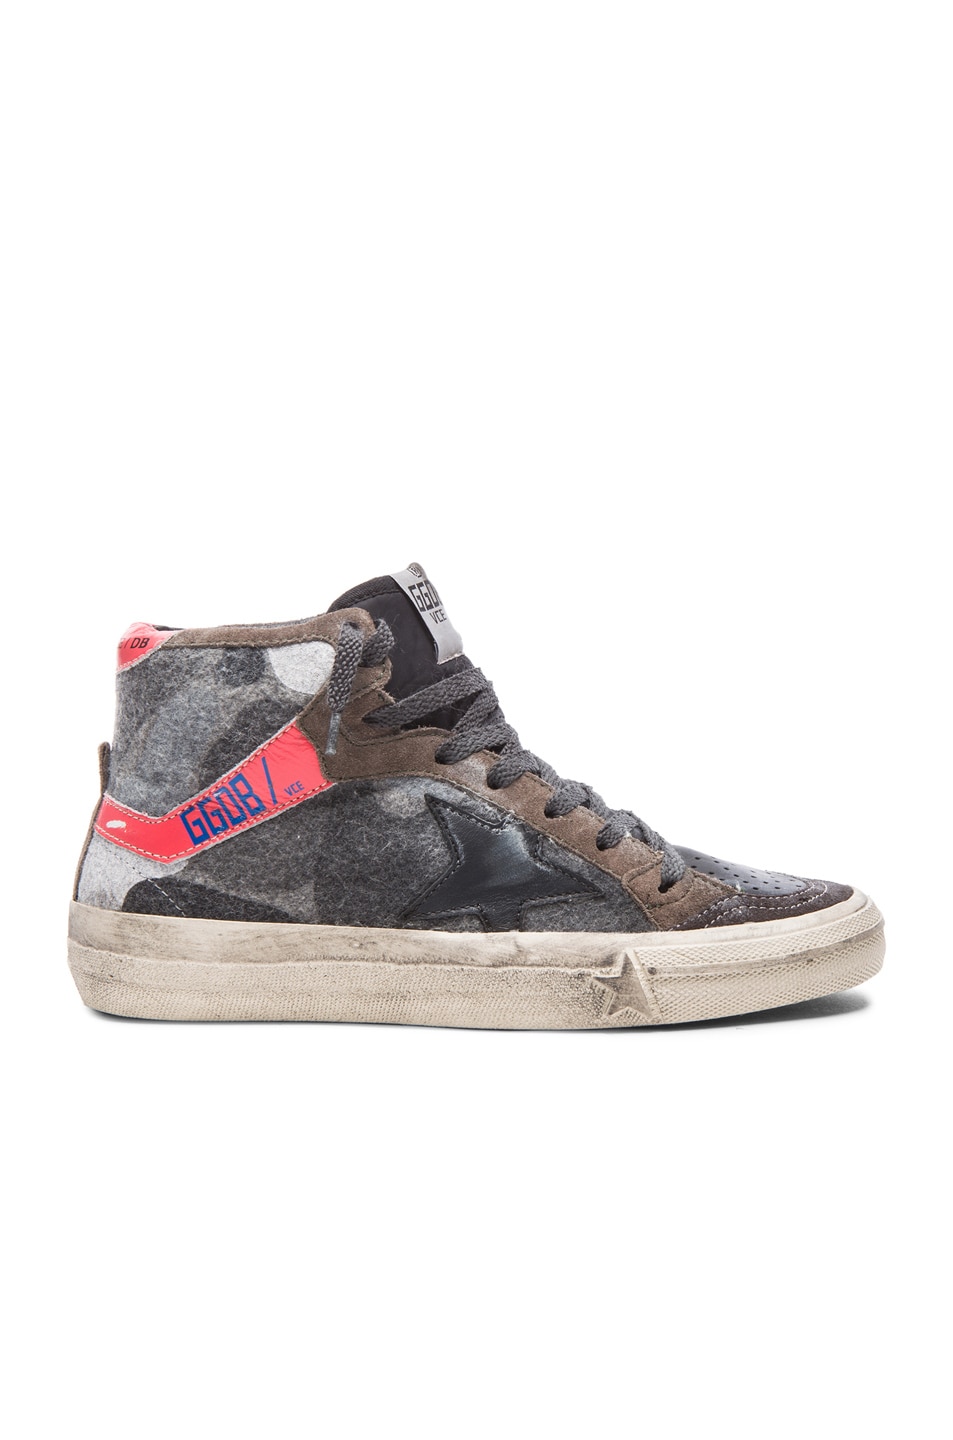 Image 1 of Golden Goose 2.12 Wool Sneakers in Camouflage